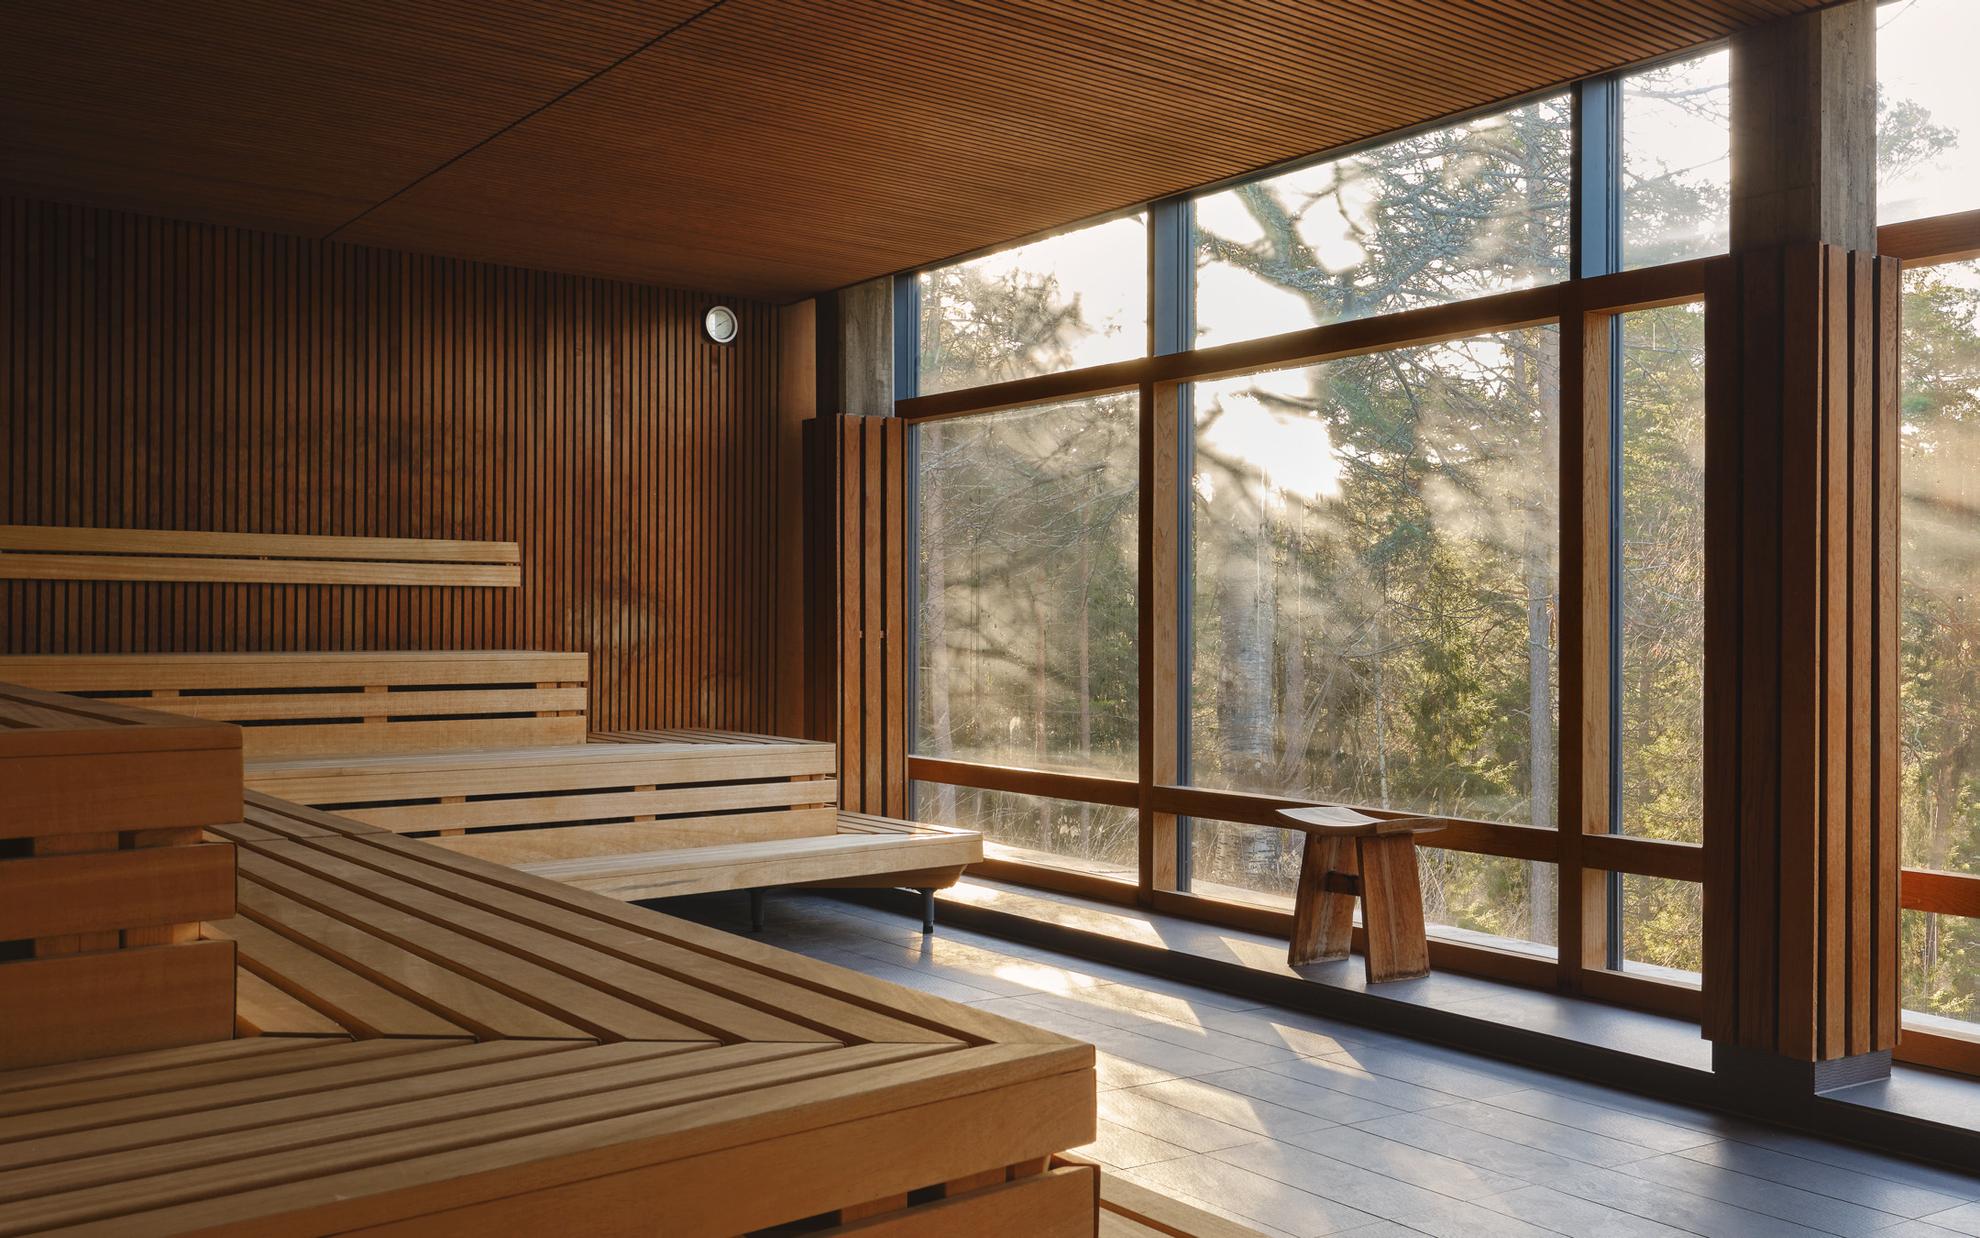 A wooden dry sauna with large panoramic windows facing the forest.